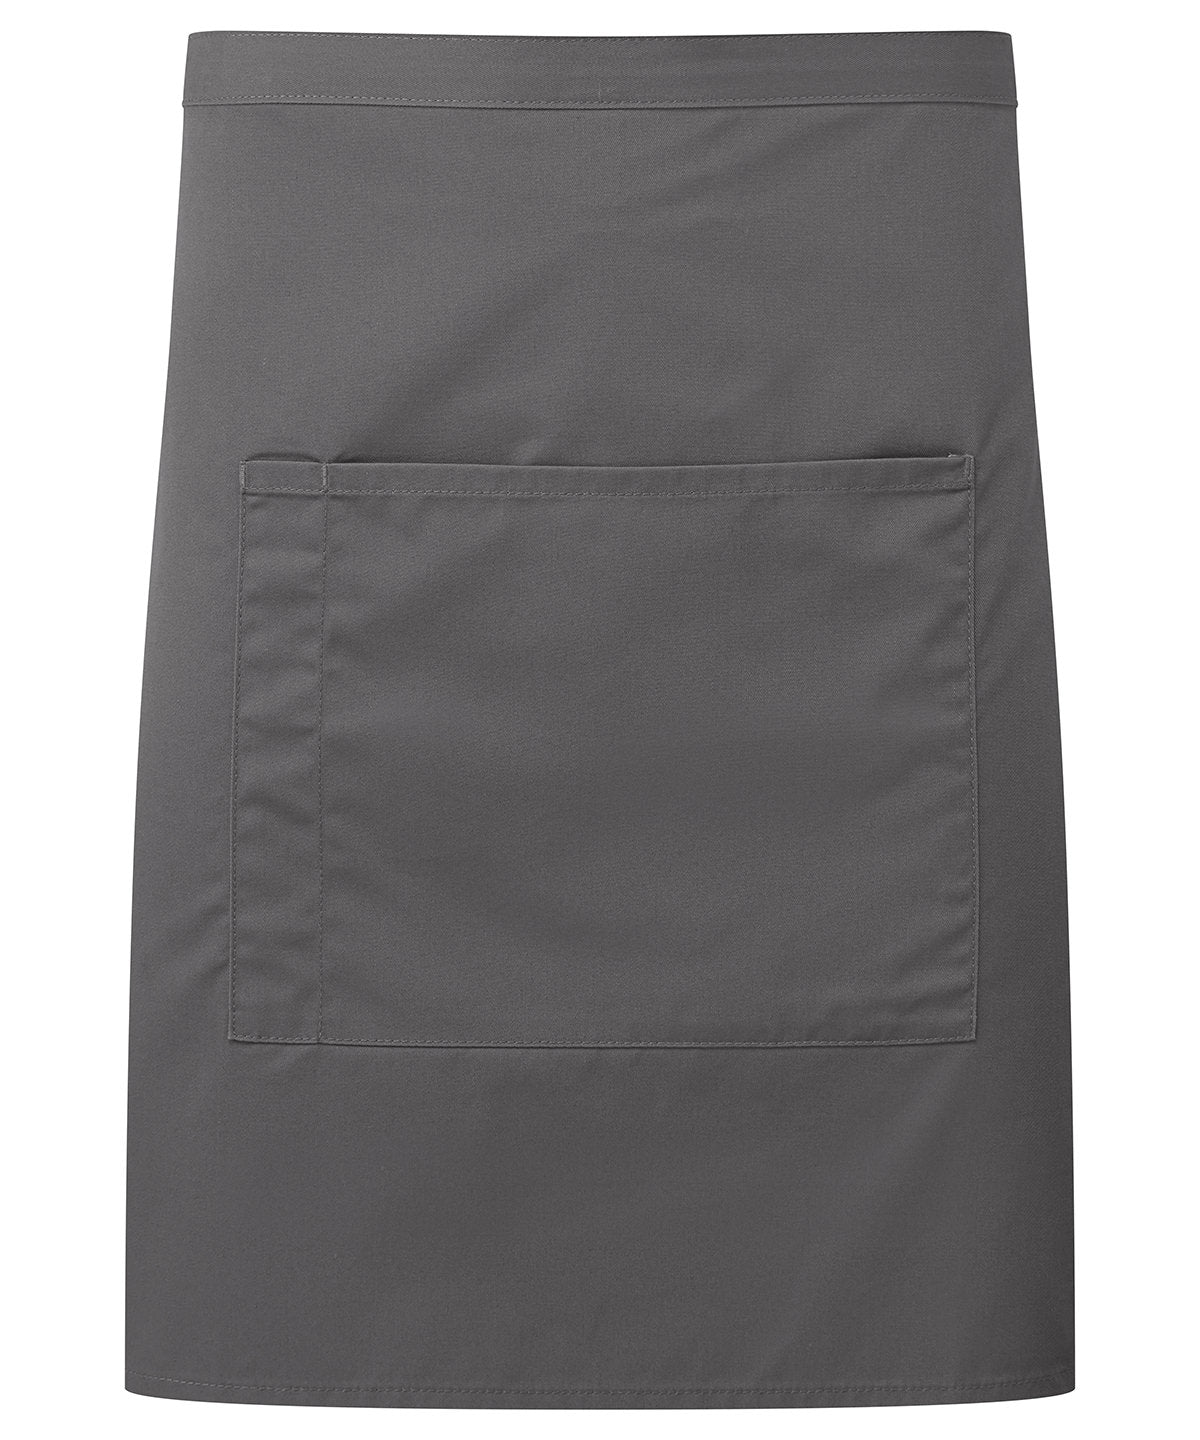 ‘Colours collection’ mid-length pocket apron